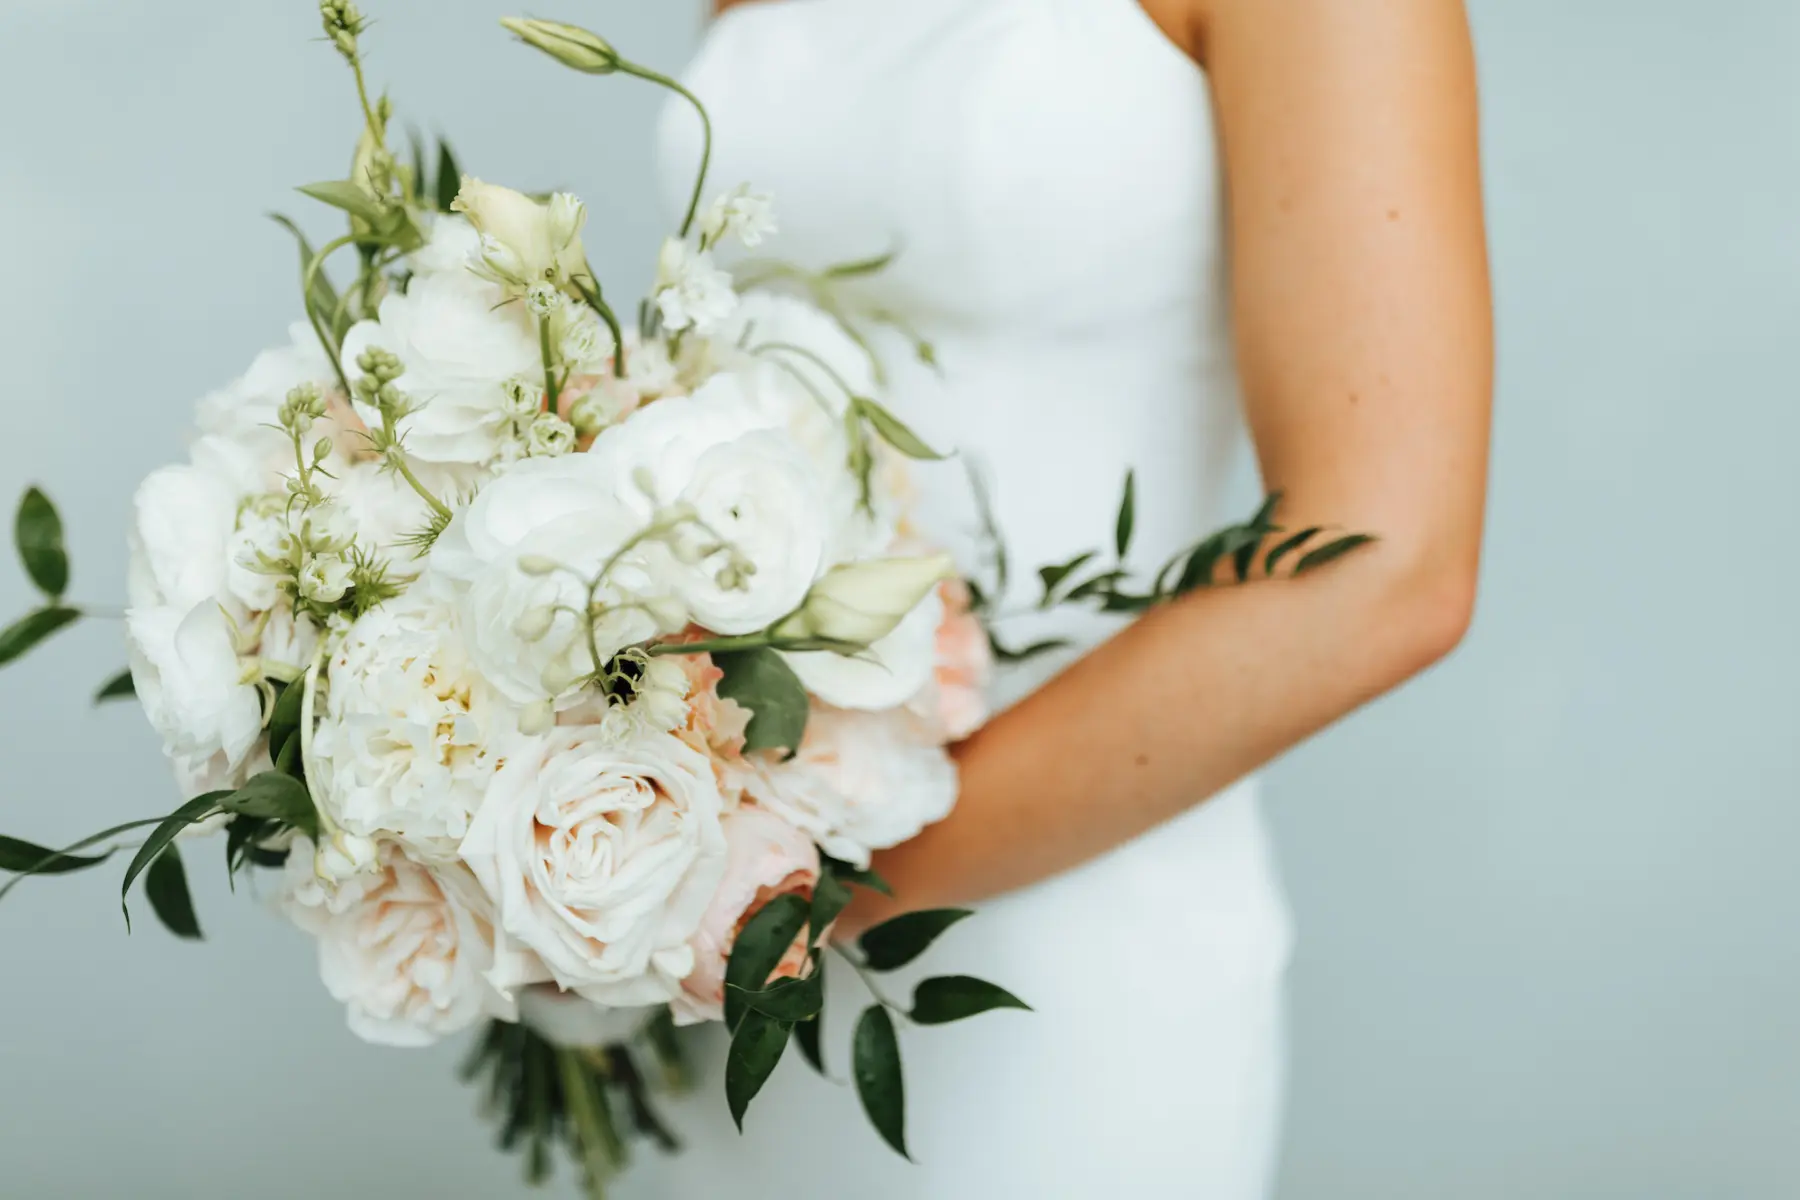 Classic Elegant White and Blush Pink Rose Wedding Bouquet Inspiration | Florist Save the Date Florida